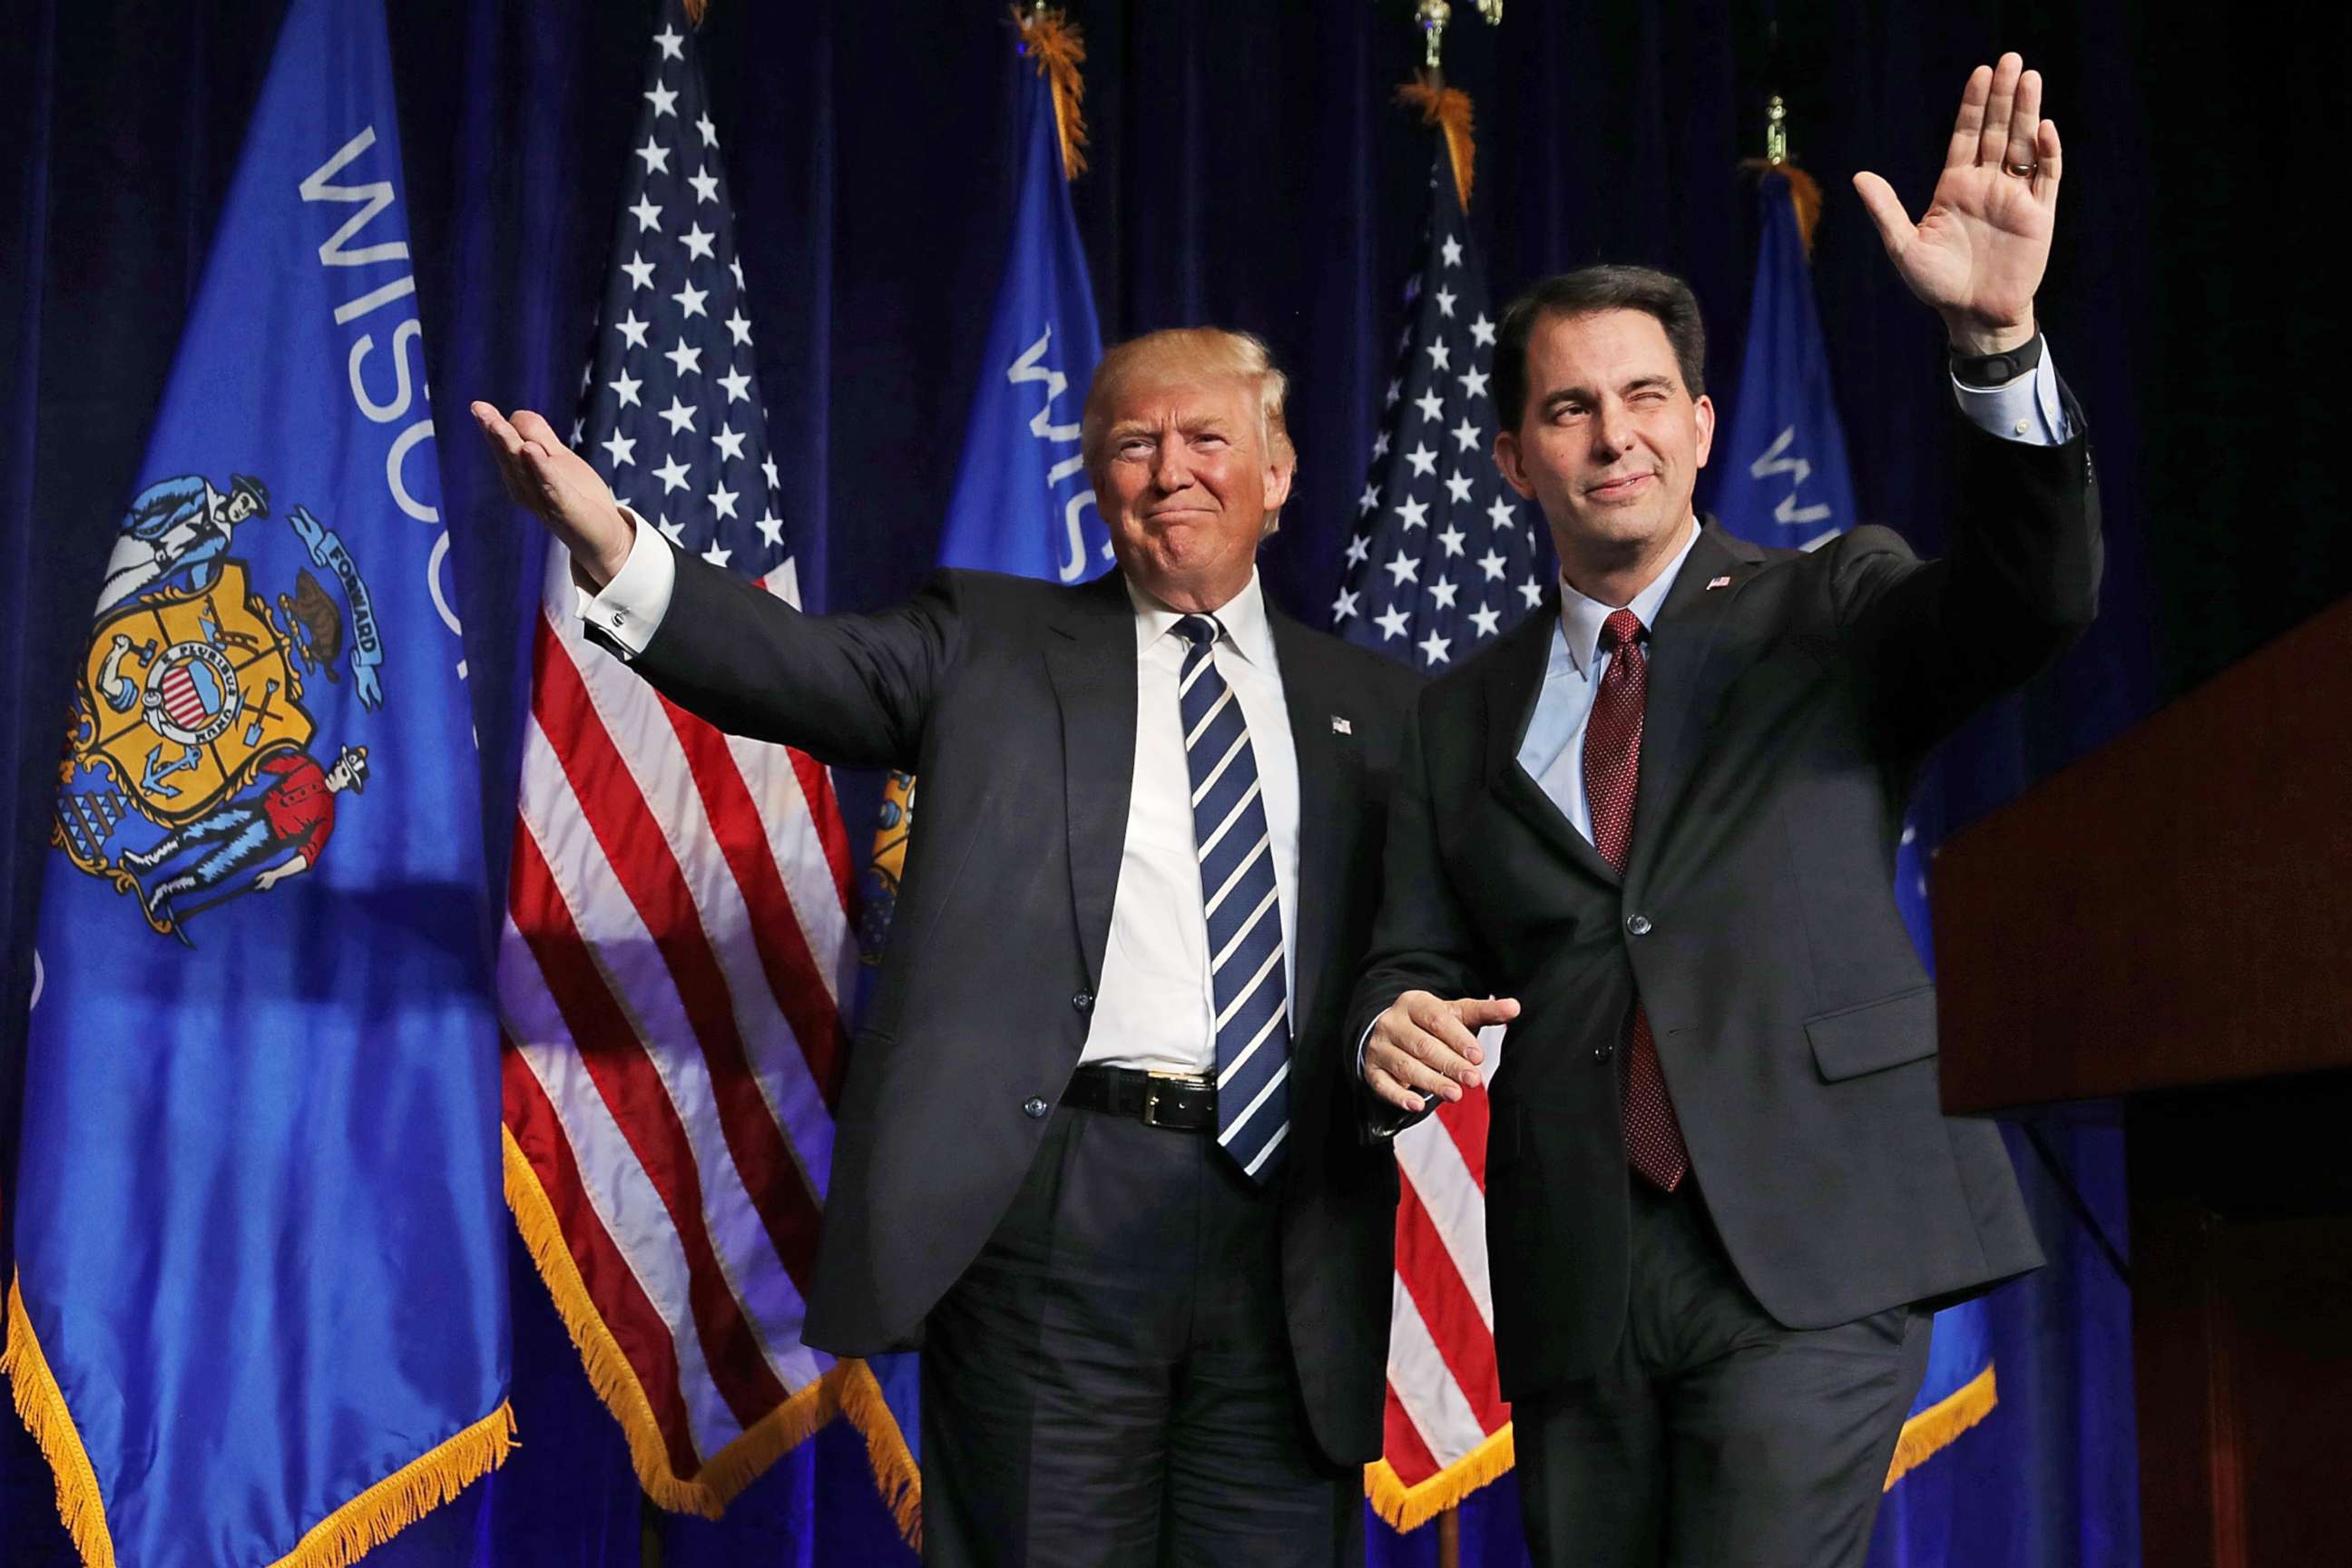 PHOTO: Republican presidential nominee Donald Trump is welcomed to the stage by Wisconsin Governor Scott Walker during a campaign rally at the W.L. Zorn Arena, Nov. 1, 2016 in Altoona, Wisc. 